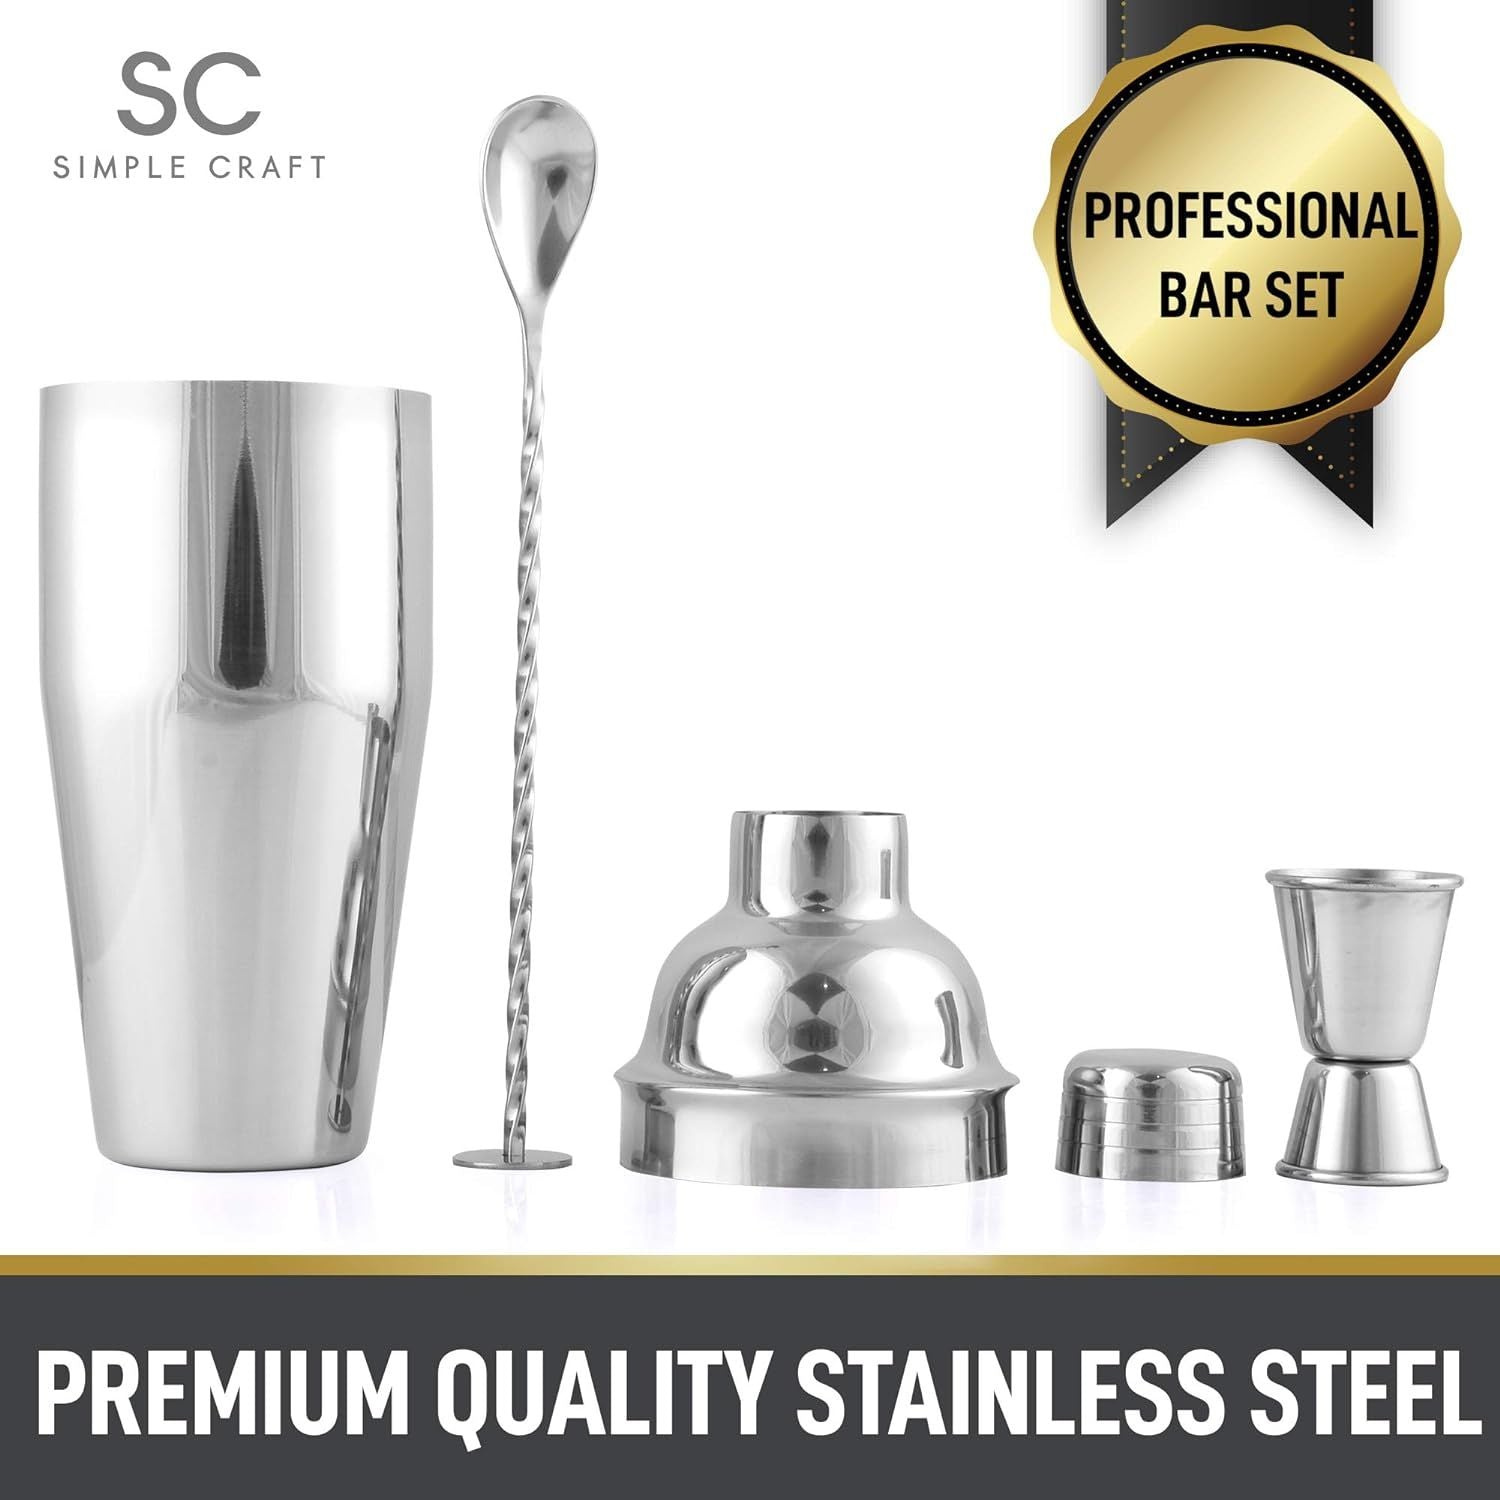 Premium quality stainless steel Cocktail Shaker